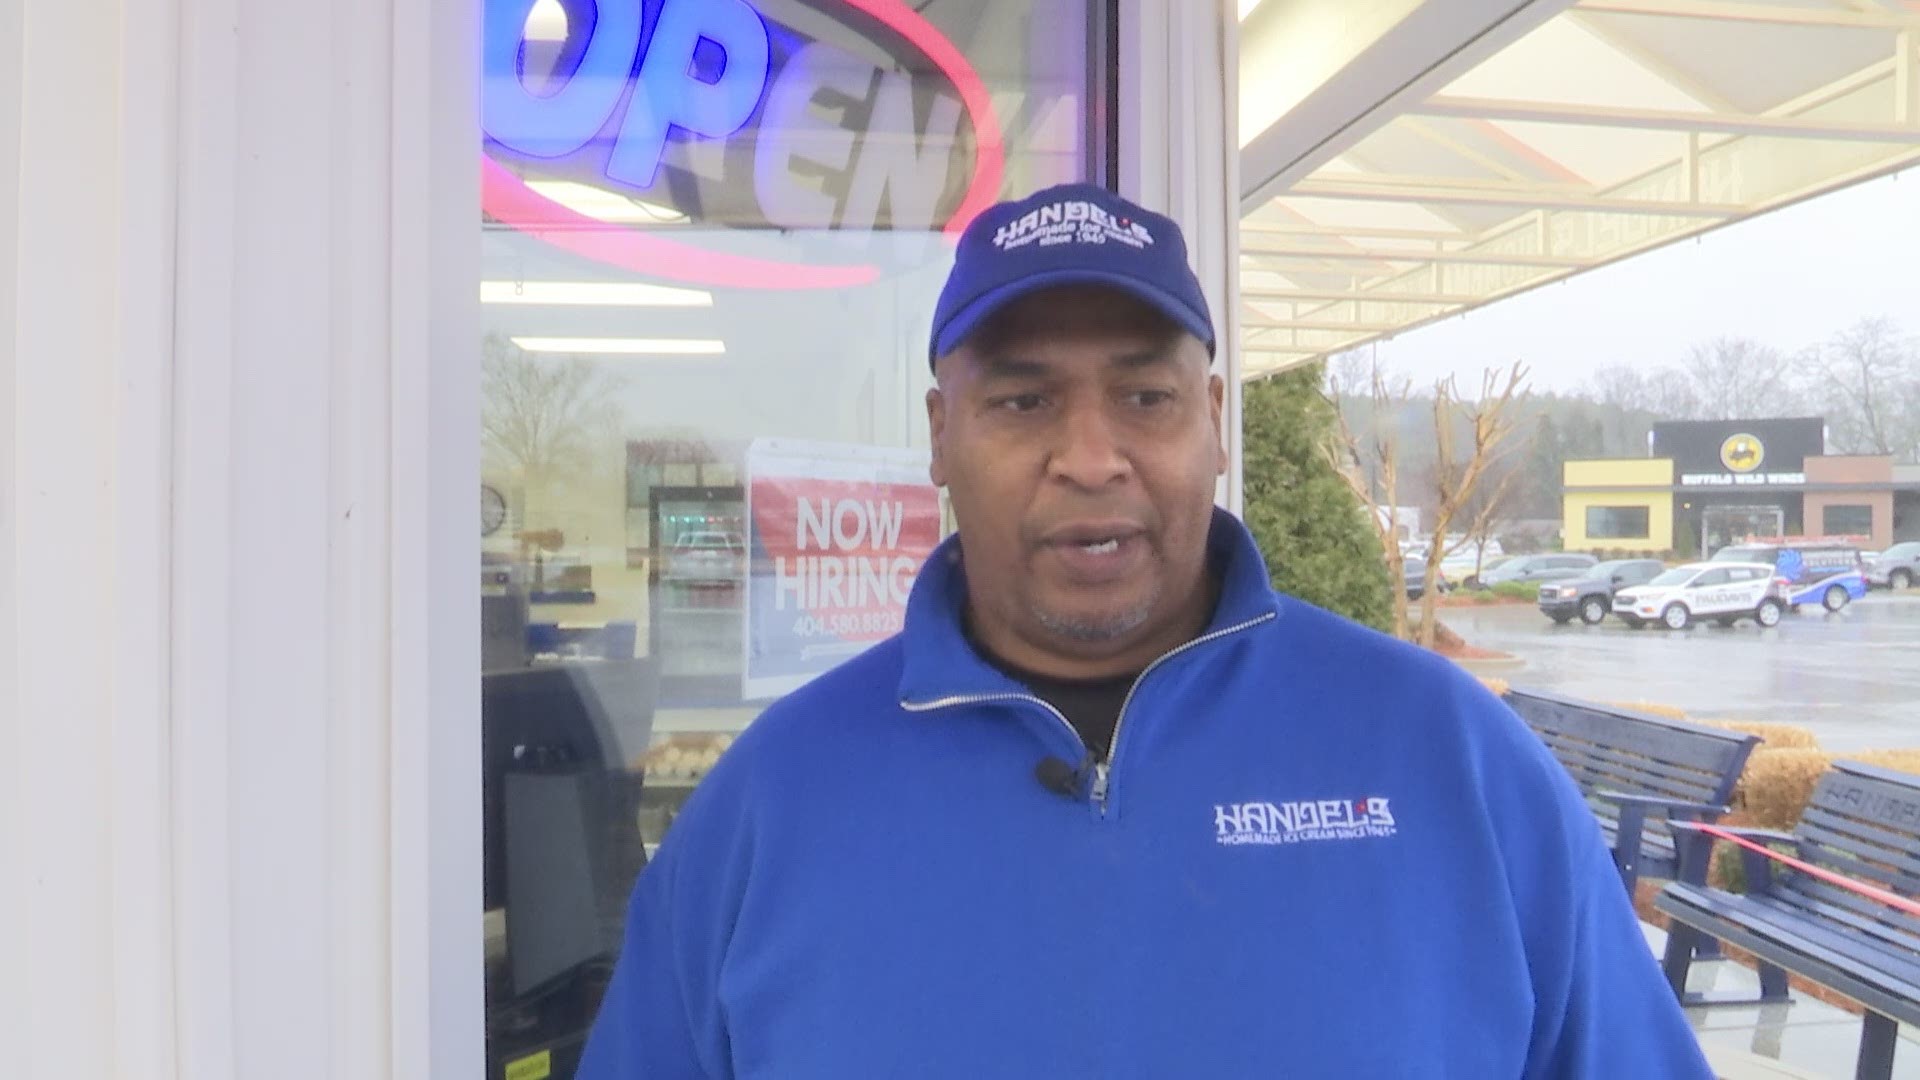 Meet Brian Vaughn, new franchise owner of Handel's Ice Cream. The shop had been closed since last June, after the previous owner wrote racial slurs on social media.